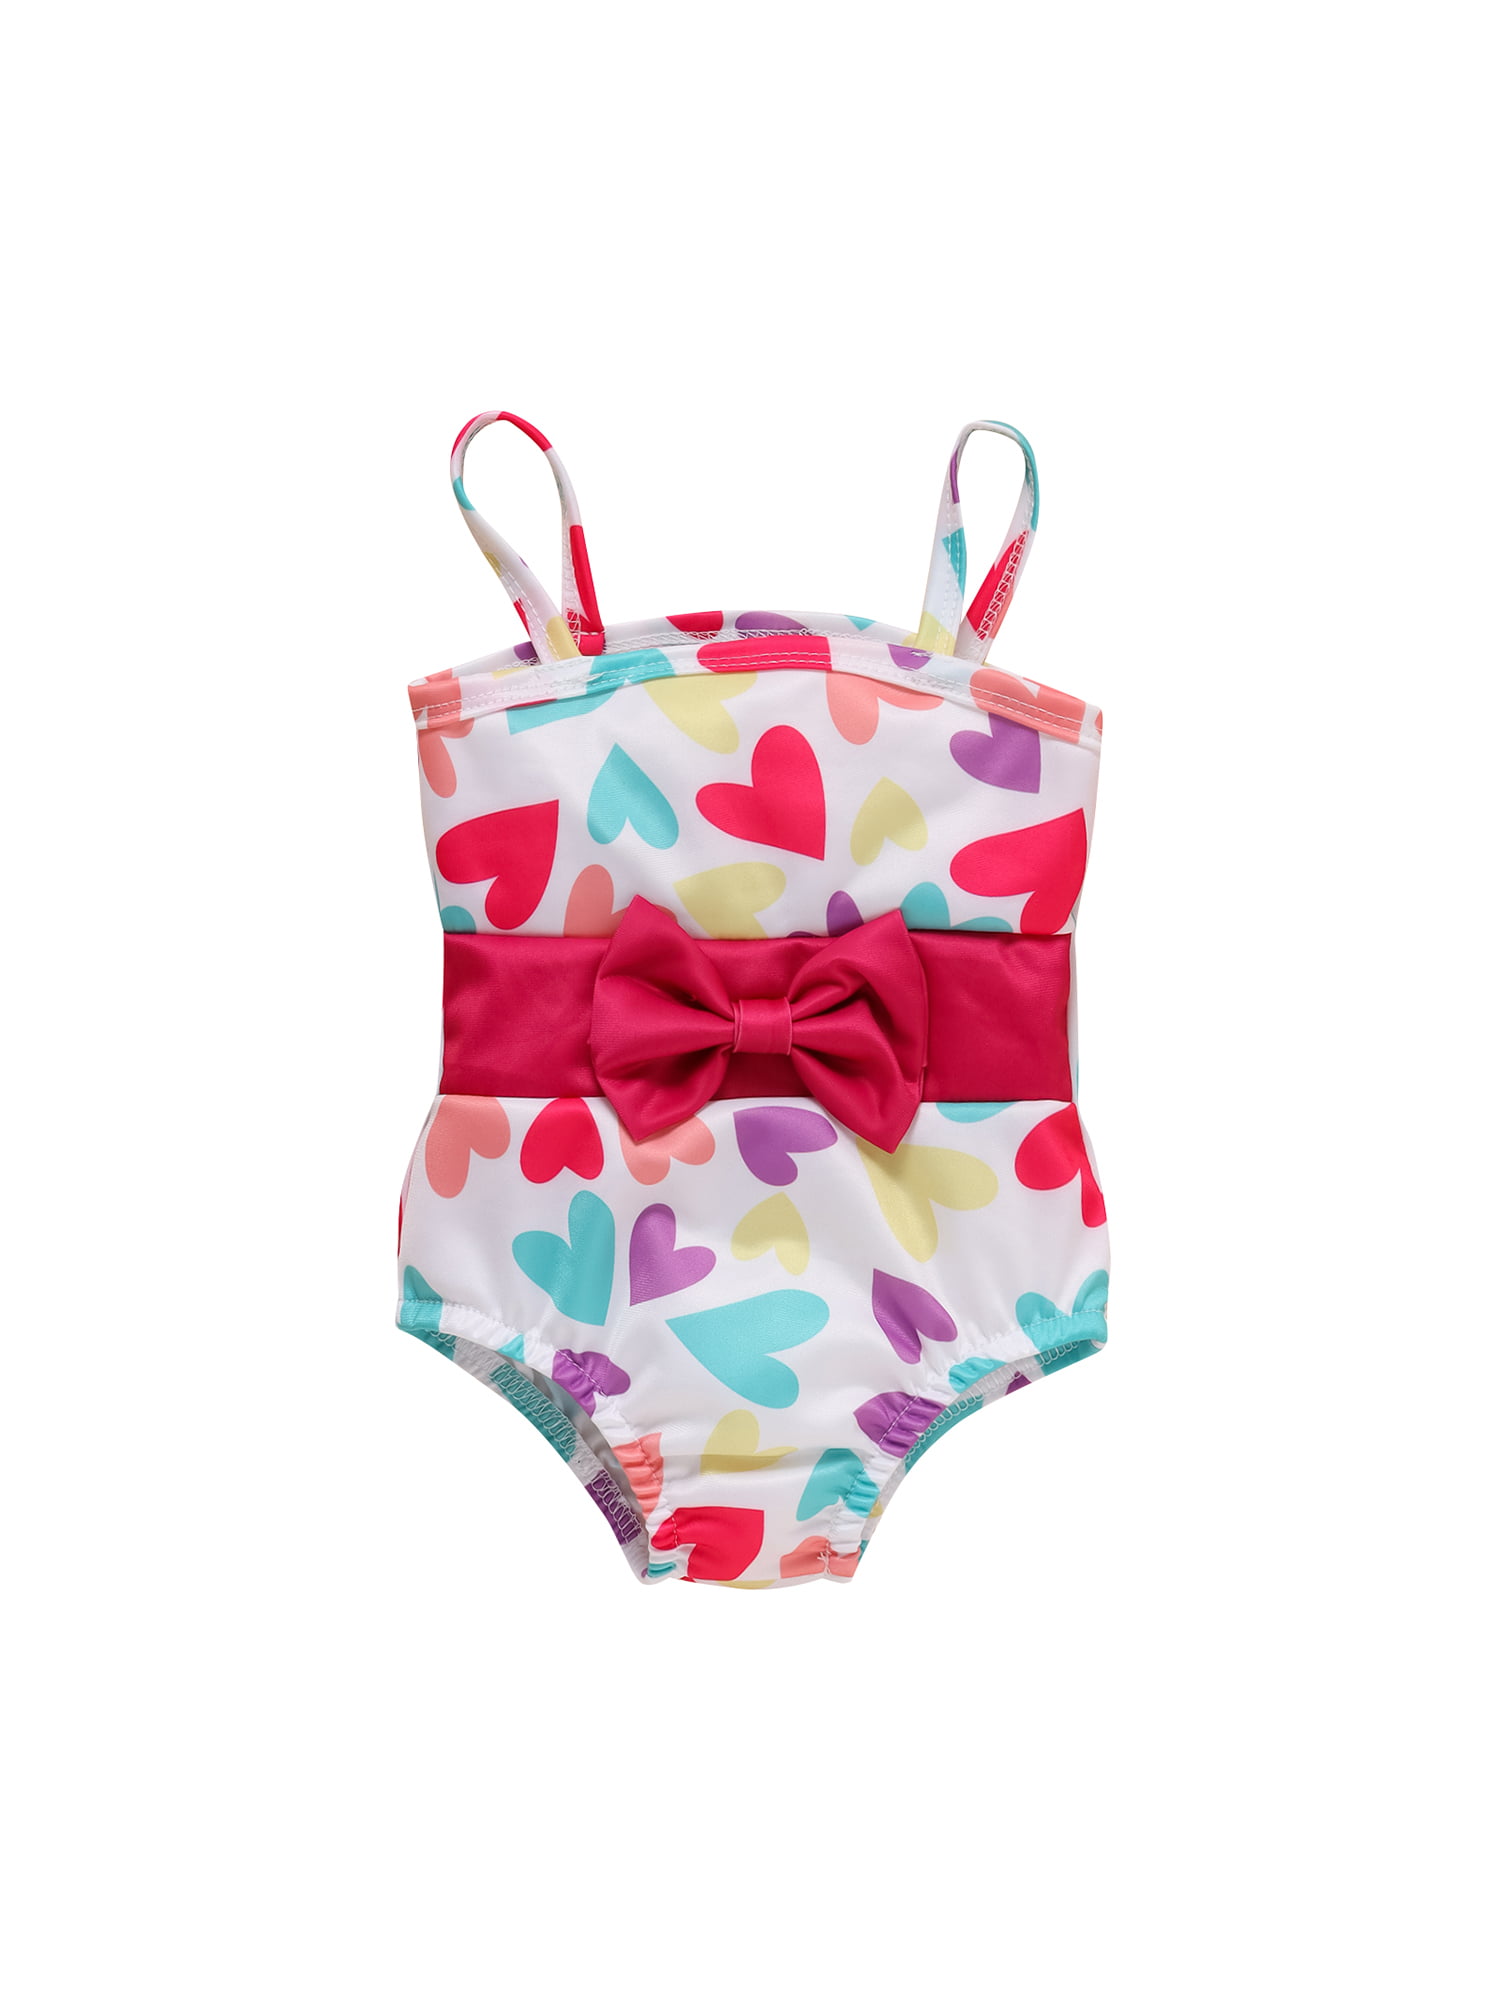 Baby Kids Girls Stripe Print Bowknot Halter Tow Piece Swimsuit High Waisted Bottom Bathing Suit 